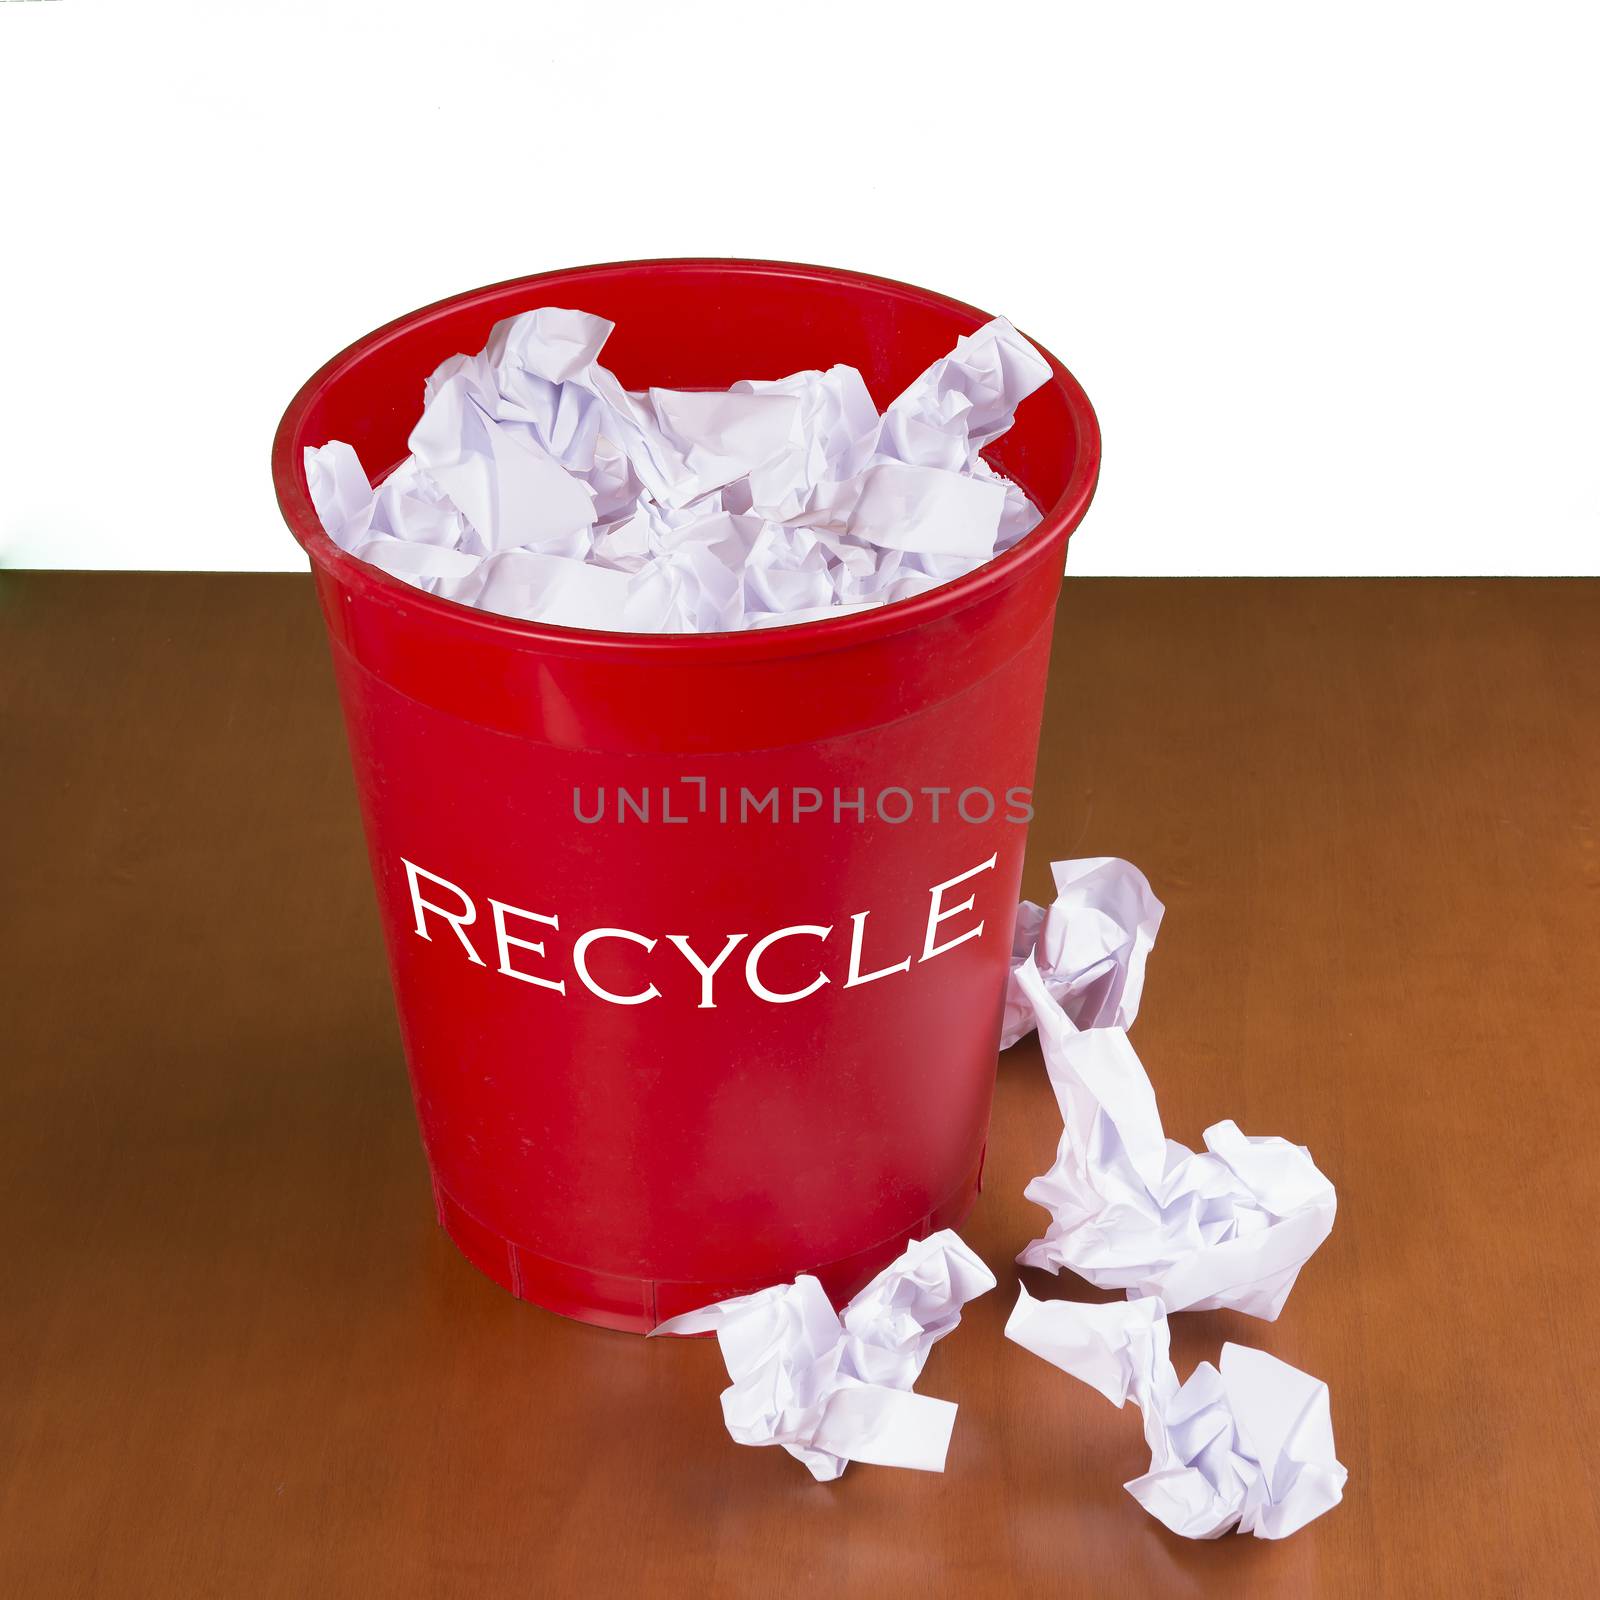 a red wastebasket for collecting waste paper